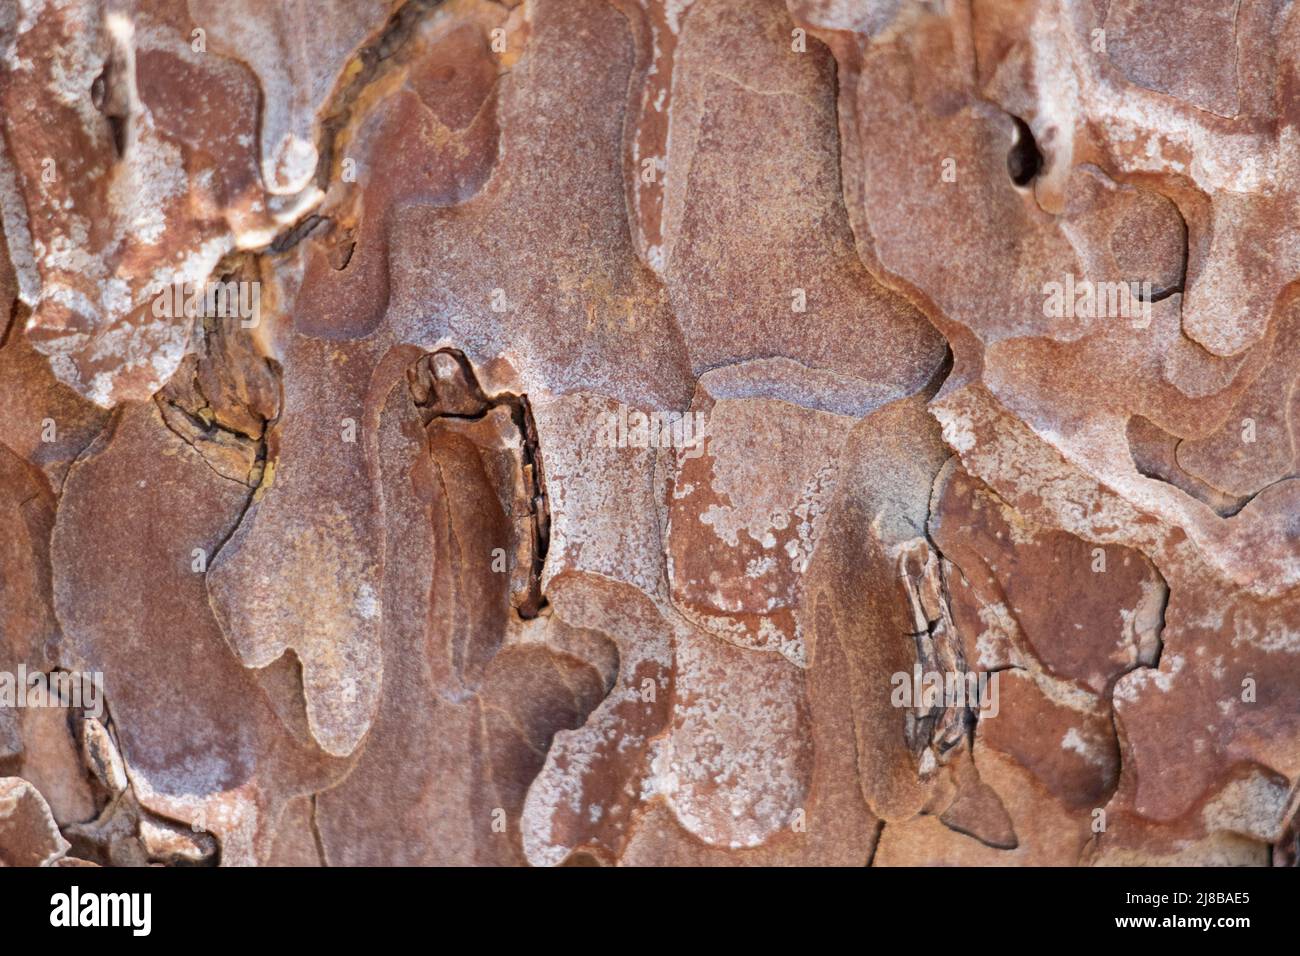 Aged red plated scaly furrowed ridge bark of Pinus Ponderosa, Pinaceae, native evergreen tree in the San Jacinto Mountains, Peninsular Ranges, Summer. Stock Photo